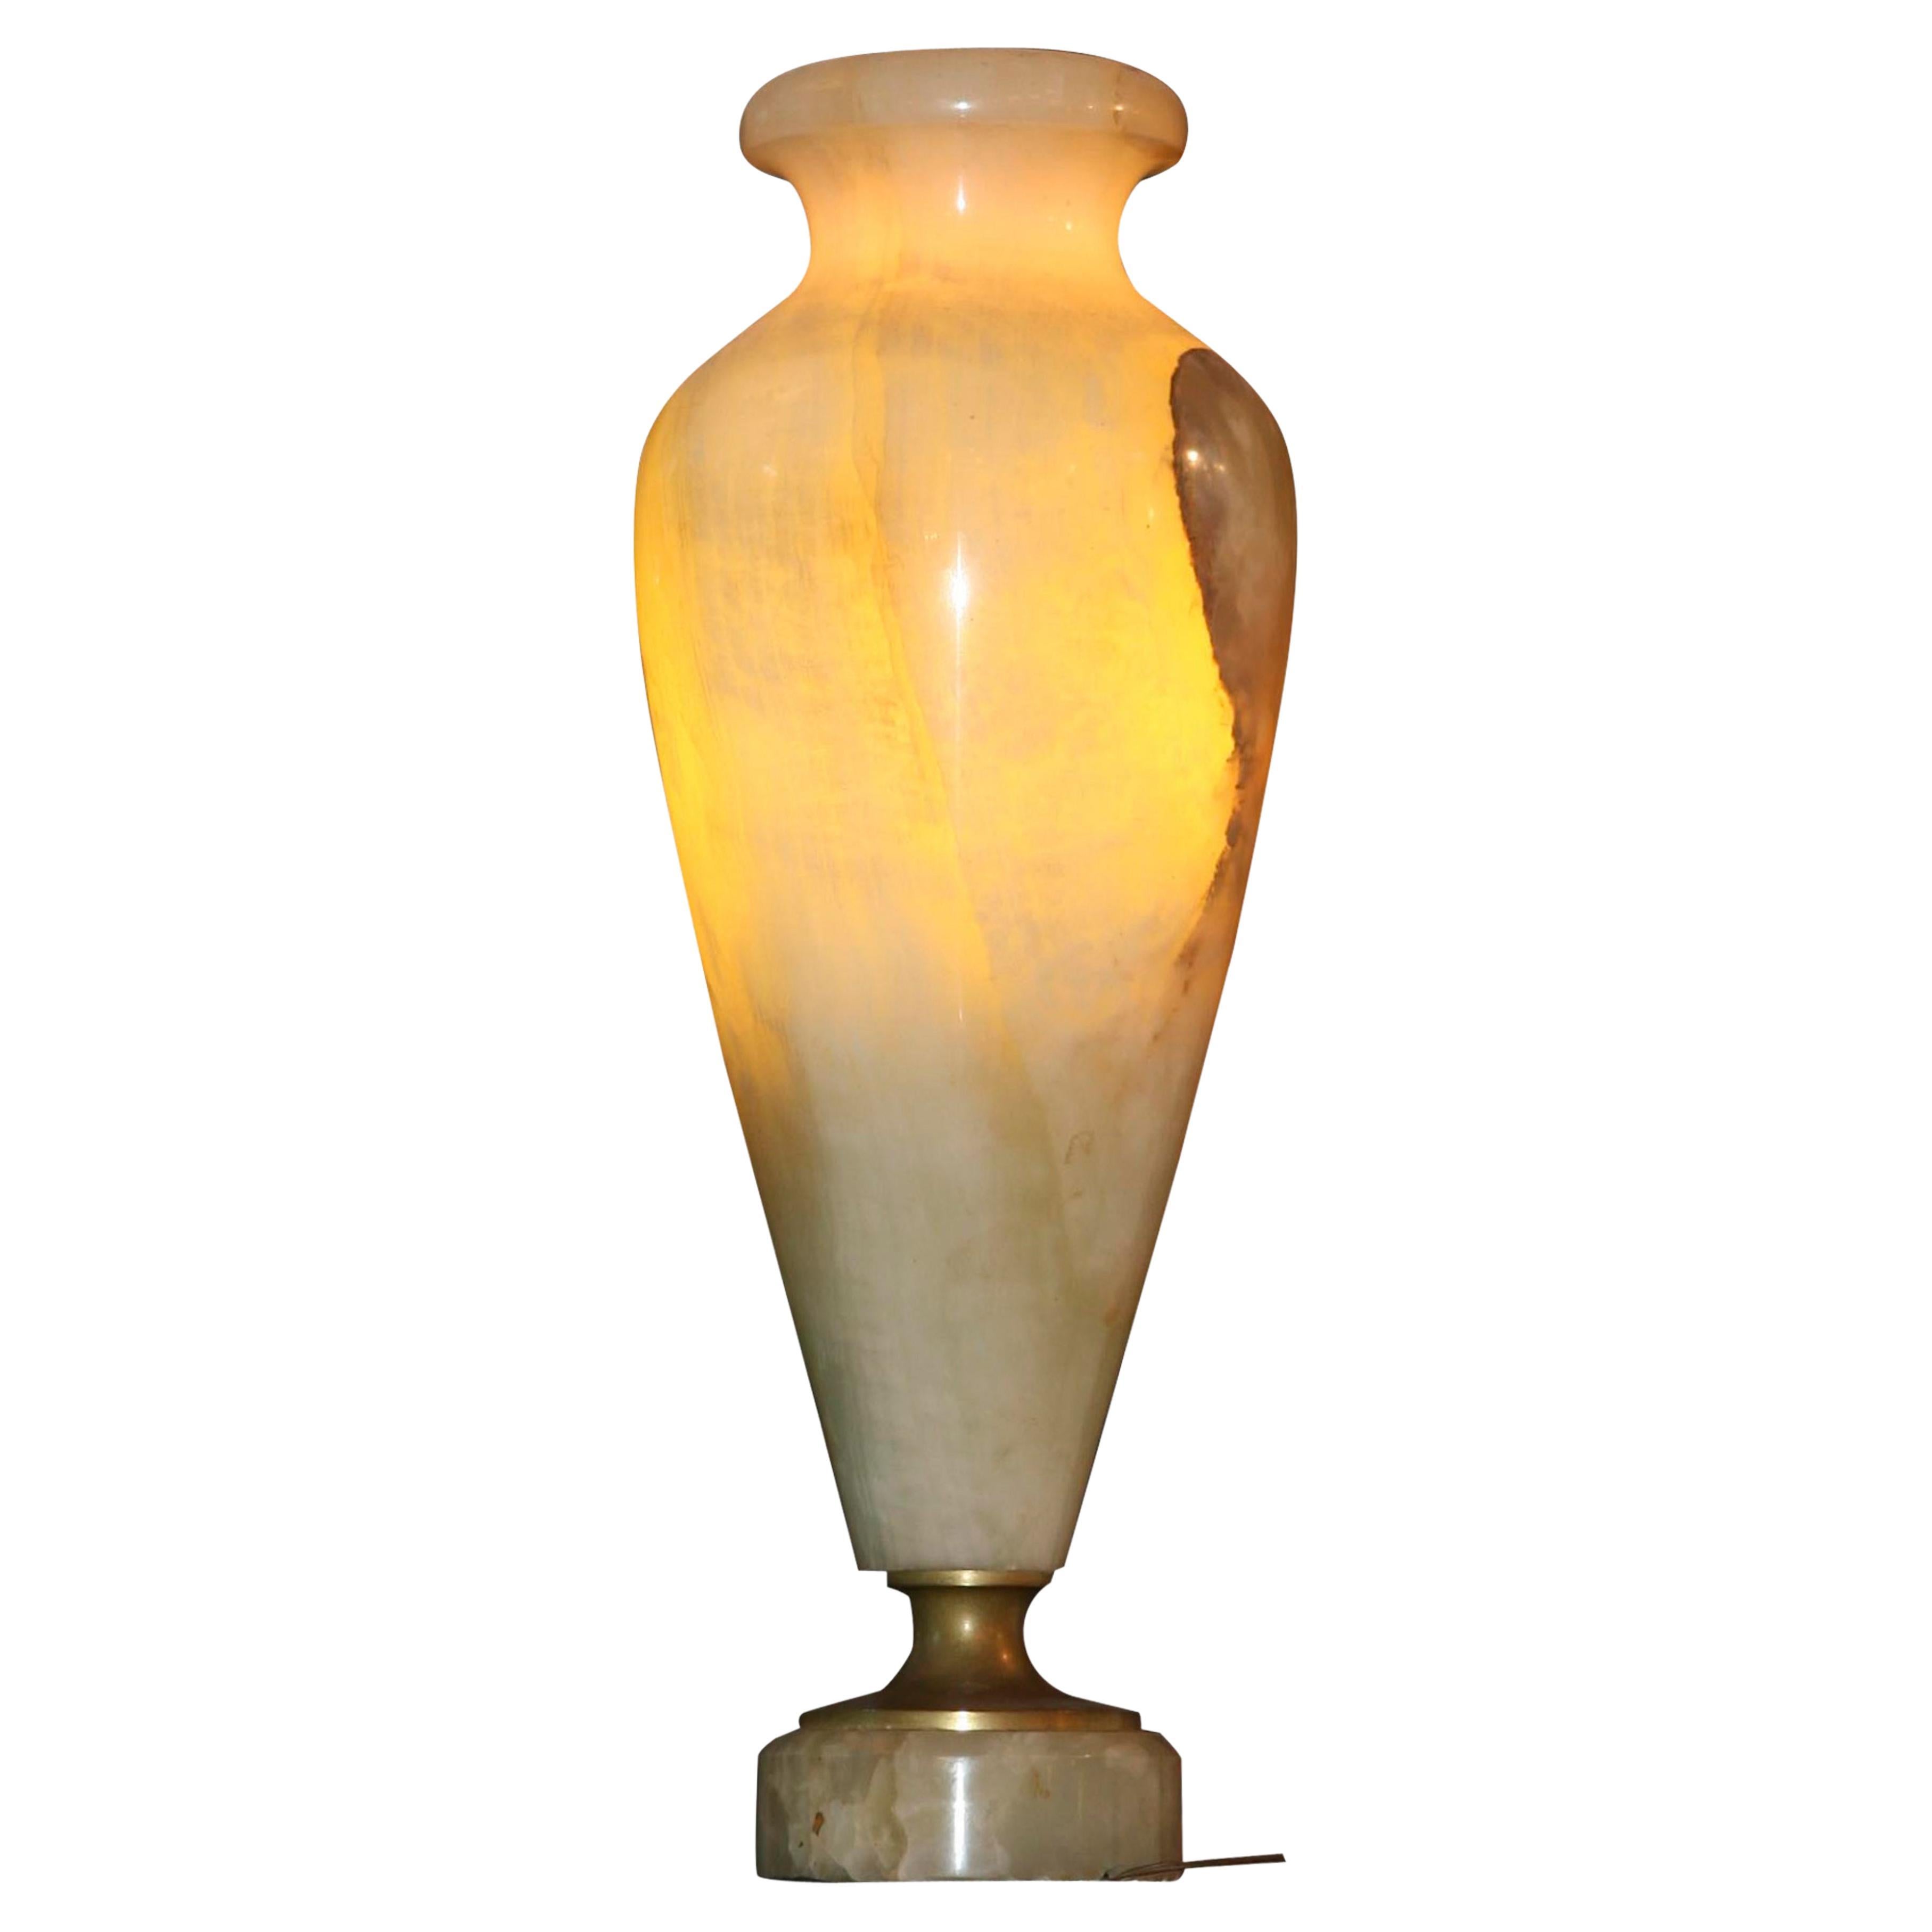 Amaizing Art deco Table Lamp in Marble, 1920, made in France For Sale